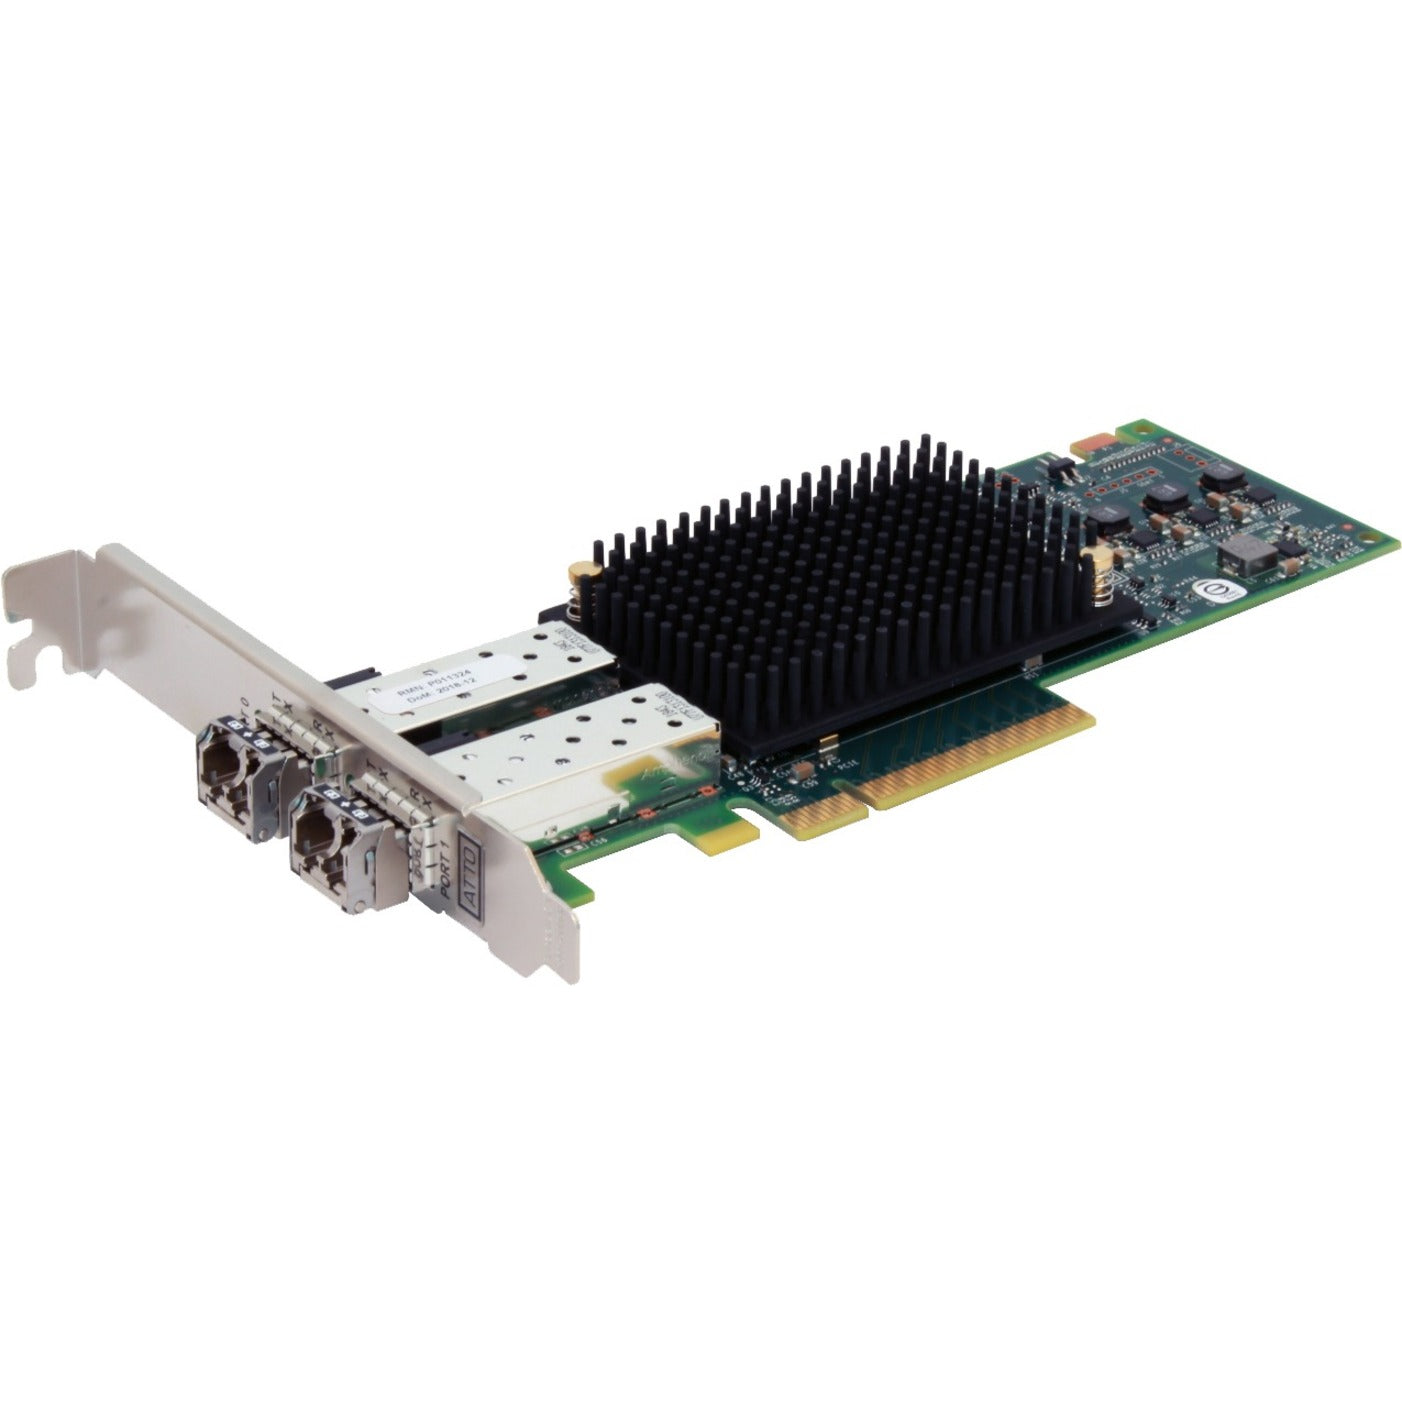 ATTO CTFC-322P-000 Celerity Fibre Channel Adapter, 32 Gbit/s Data Transfer Rate, Optical Fiber, 3 Year Limited Warranty